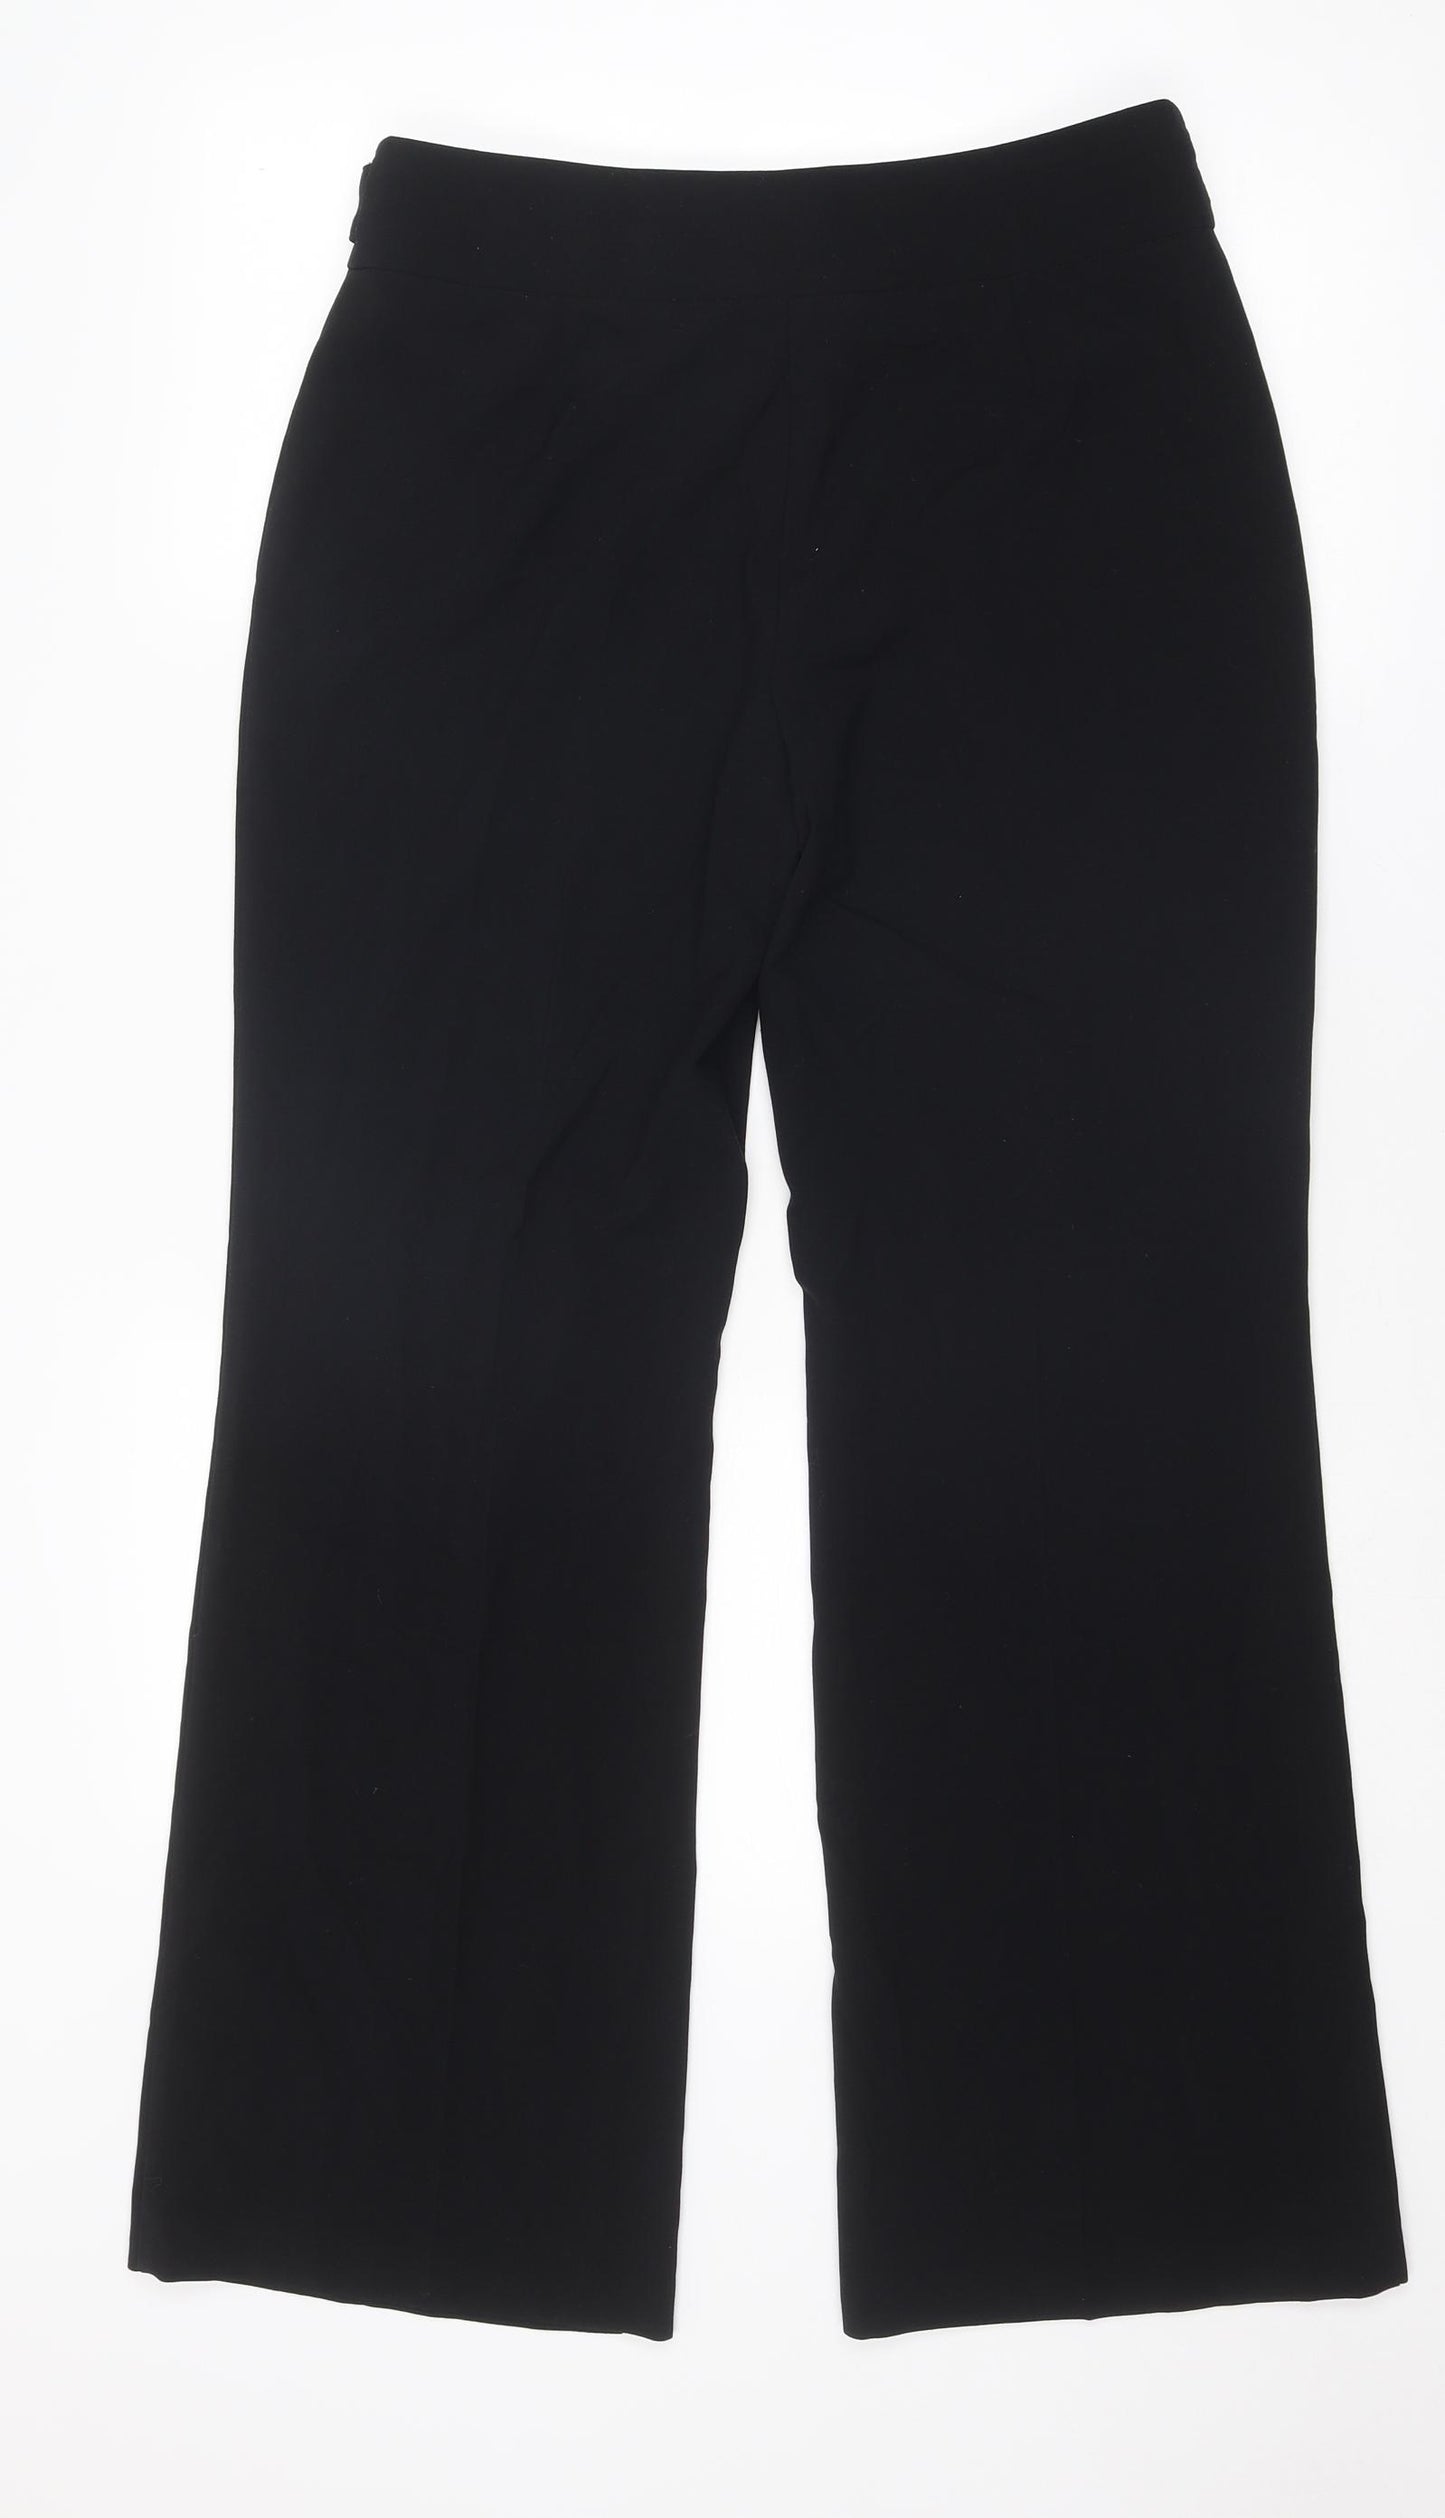 Marks and Spencer Womens Black Polyester Dress Pants Trousers Size 12 Regular Zip